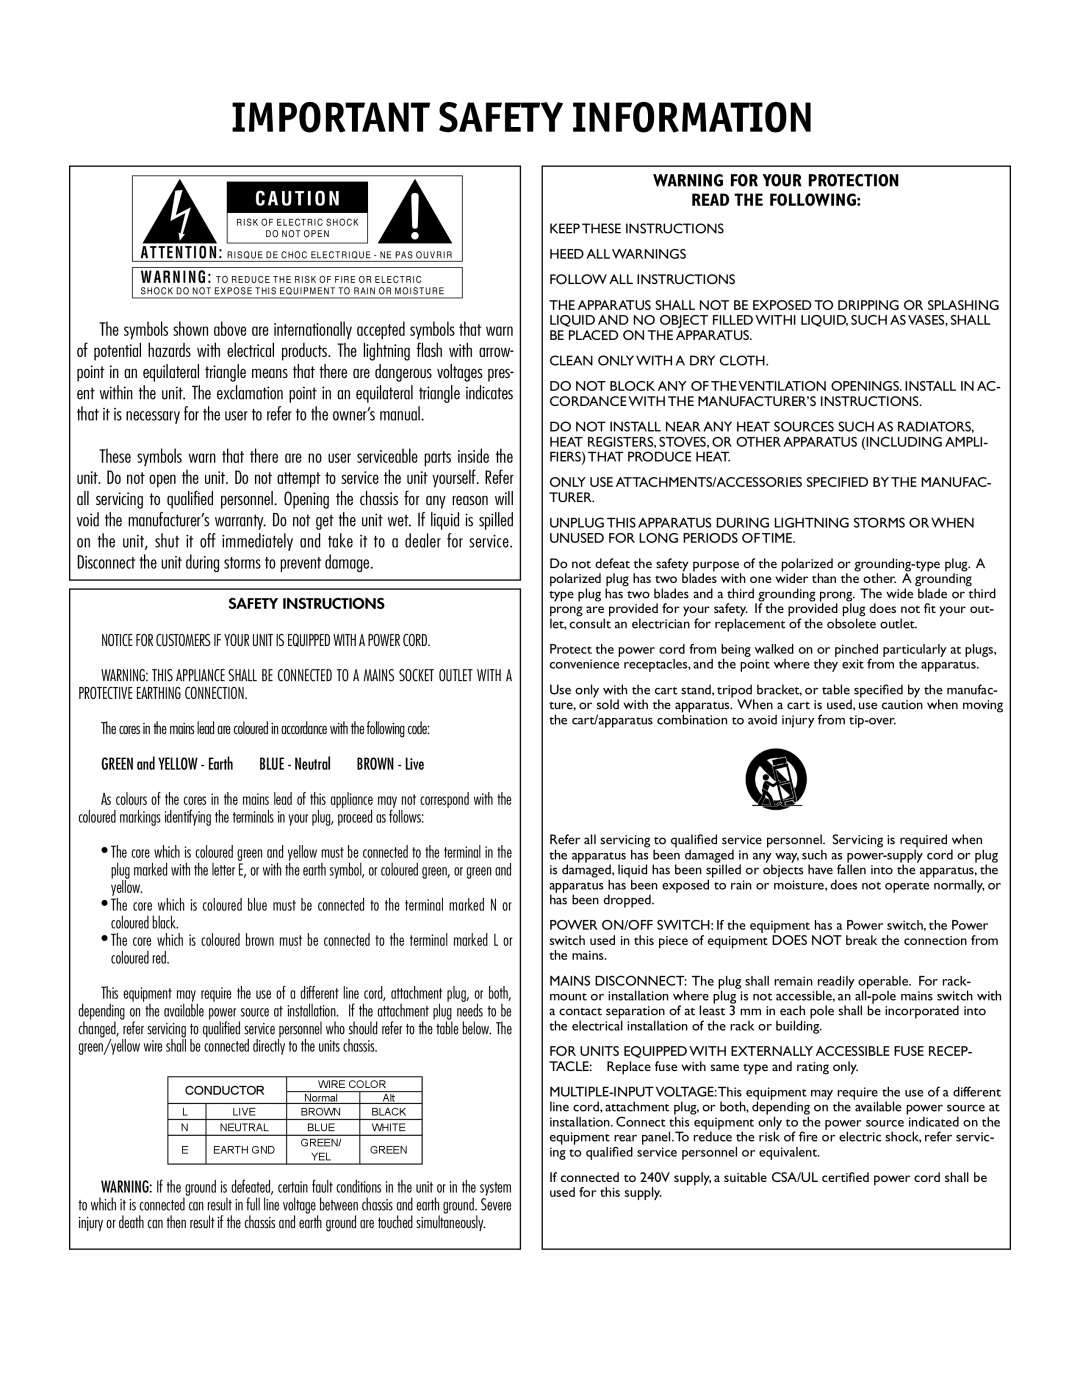 Harman 160A manual Important Safety Information, Warning For Your Protection Read The Following 